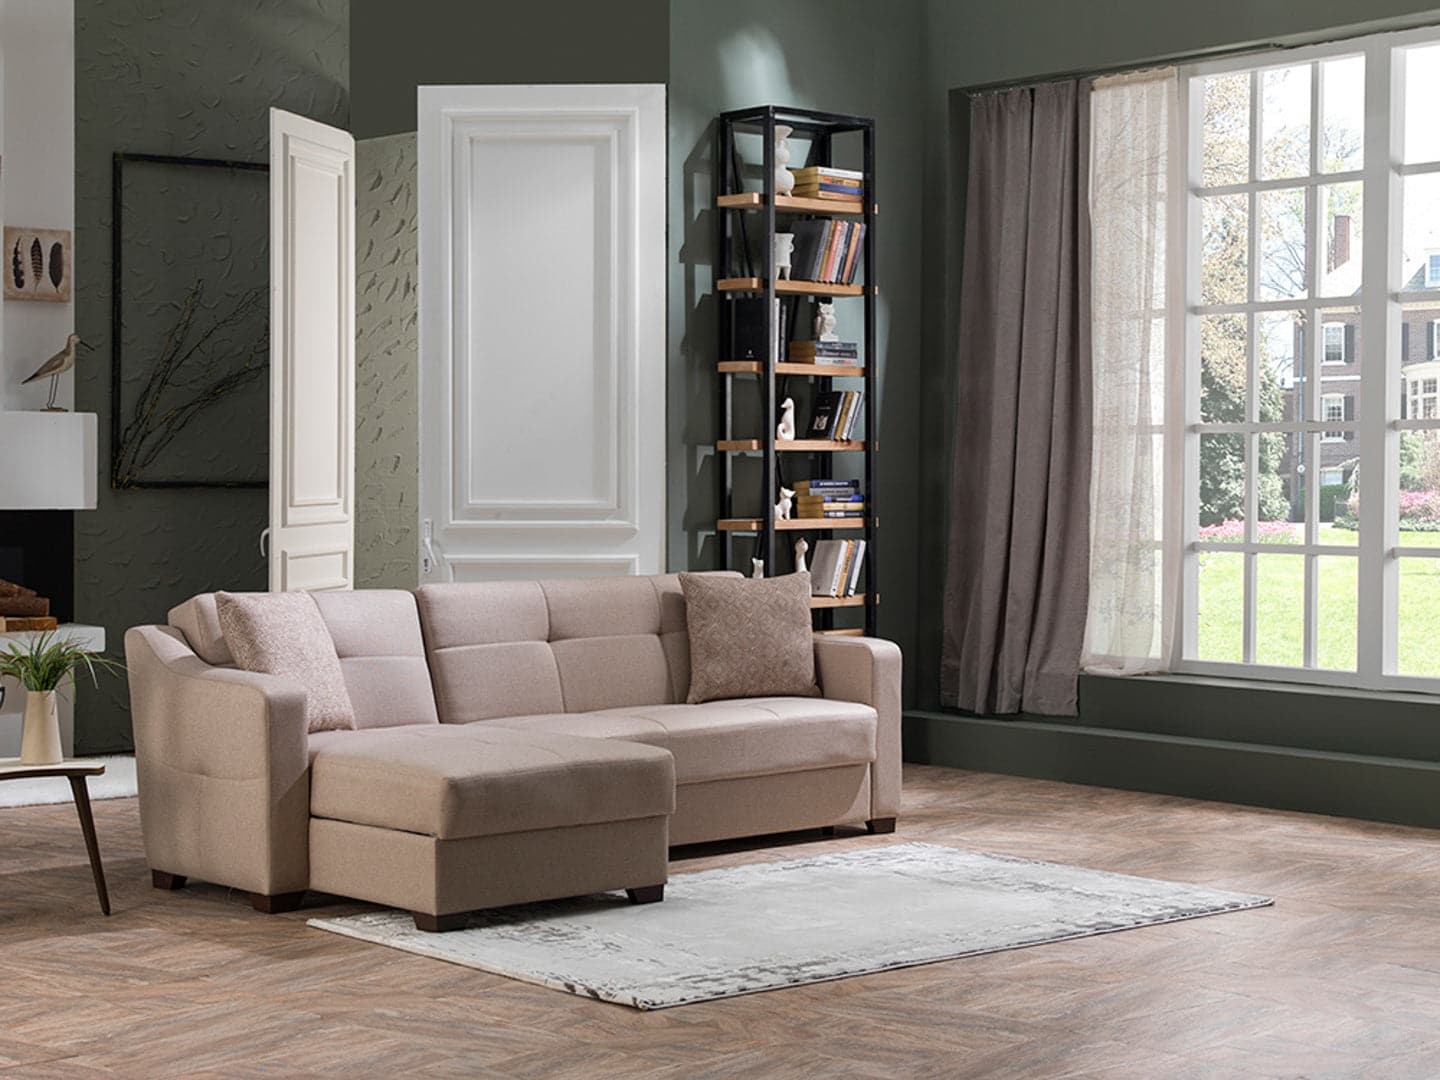 Tahoe Sleeper Sectional by Bellona REMONI VIZON Sectional Only